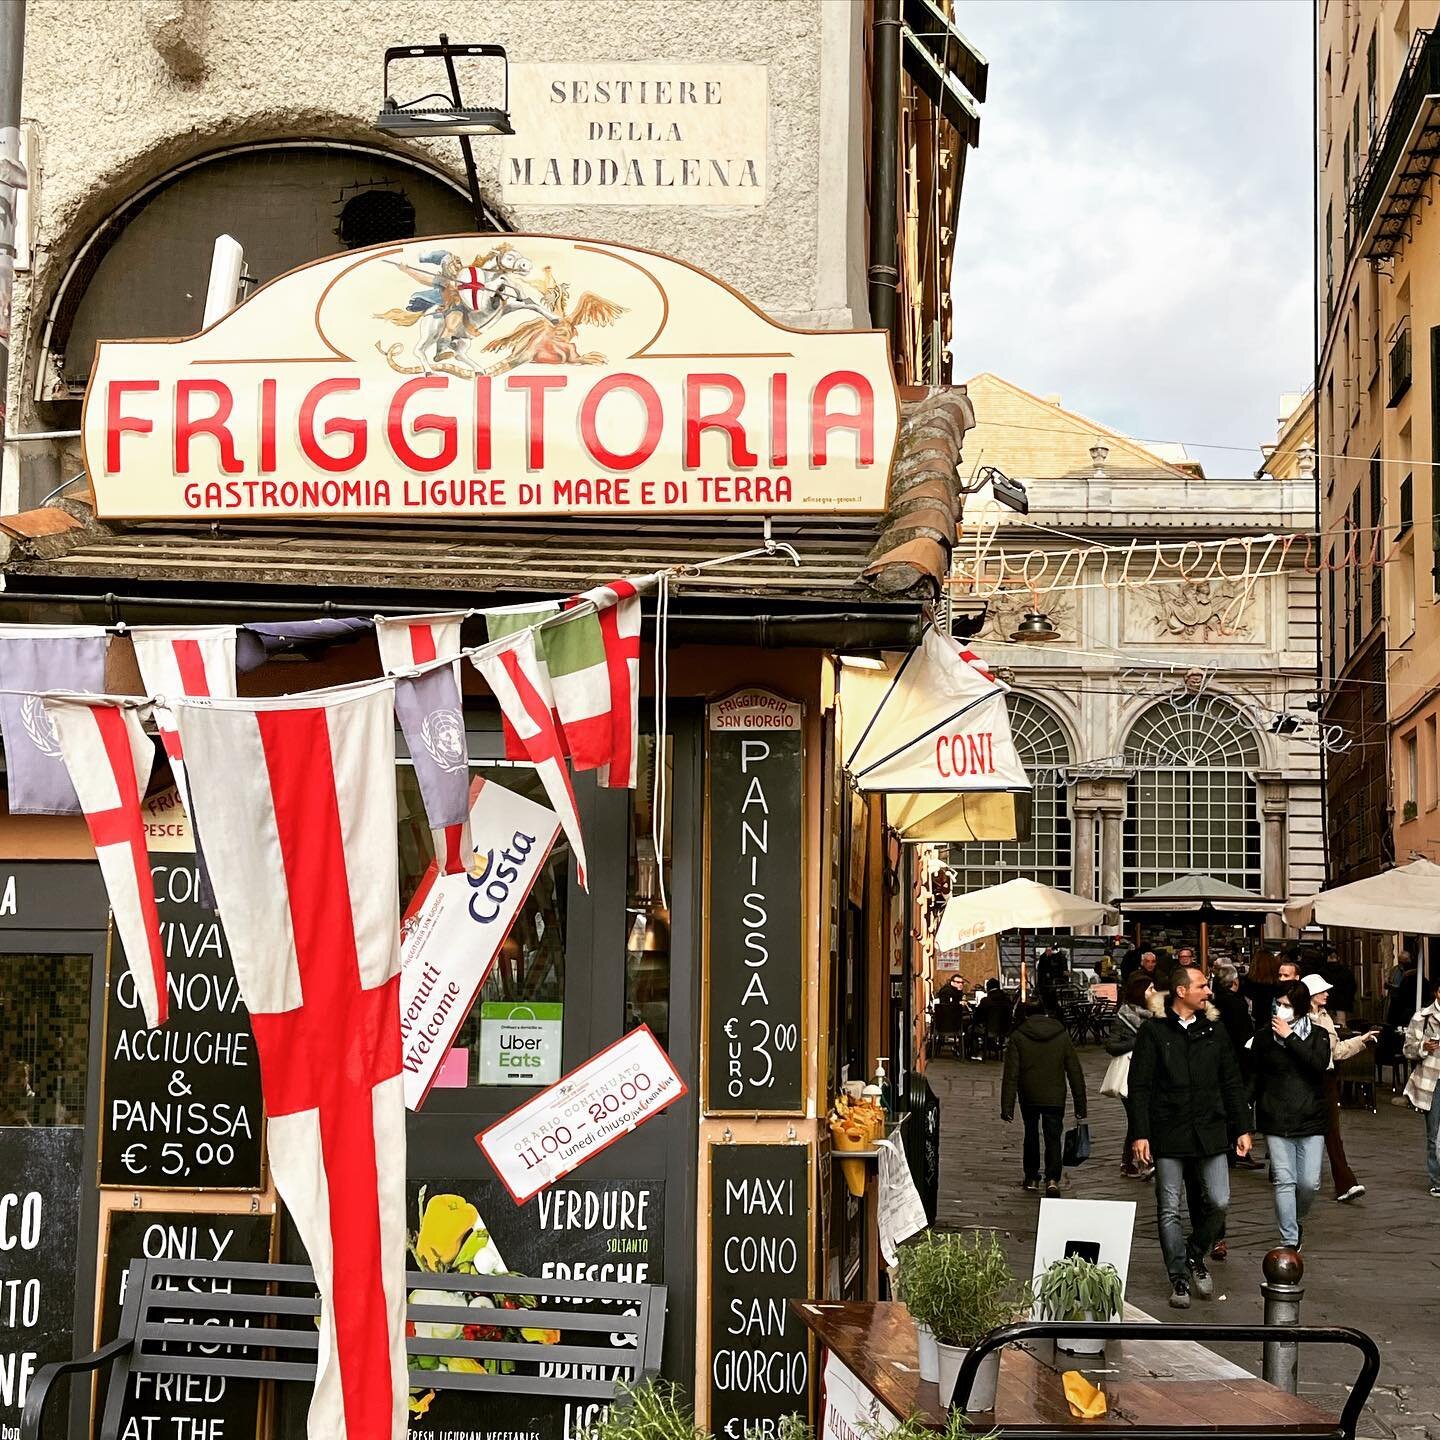 One of my favourite foodie moments happened right here next to the Genova flag - some deep fried seafood and the speciality chickpea panissa, a perfect Fritto Misto situation - ten Euros later I was strolling the board walk, the Porta Antico and all 